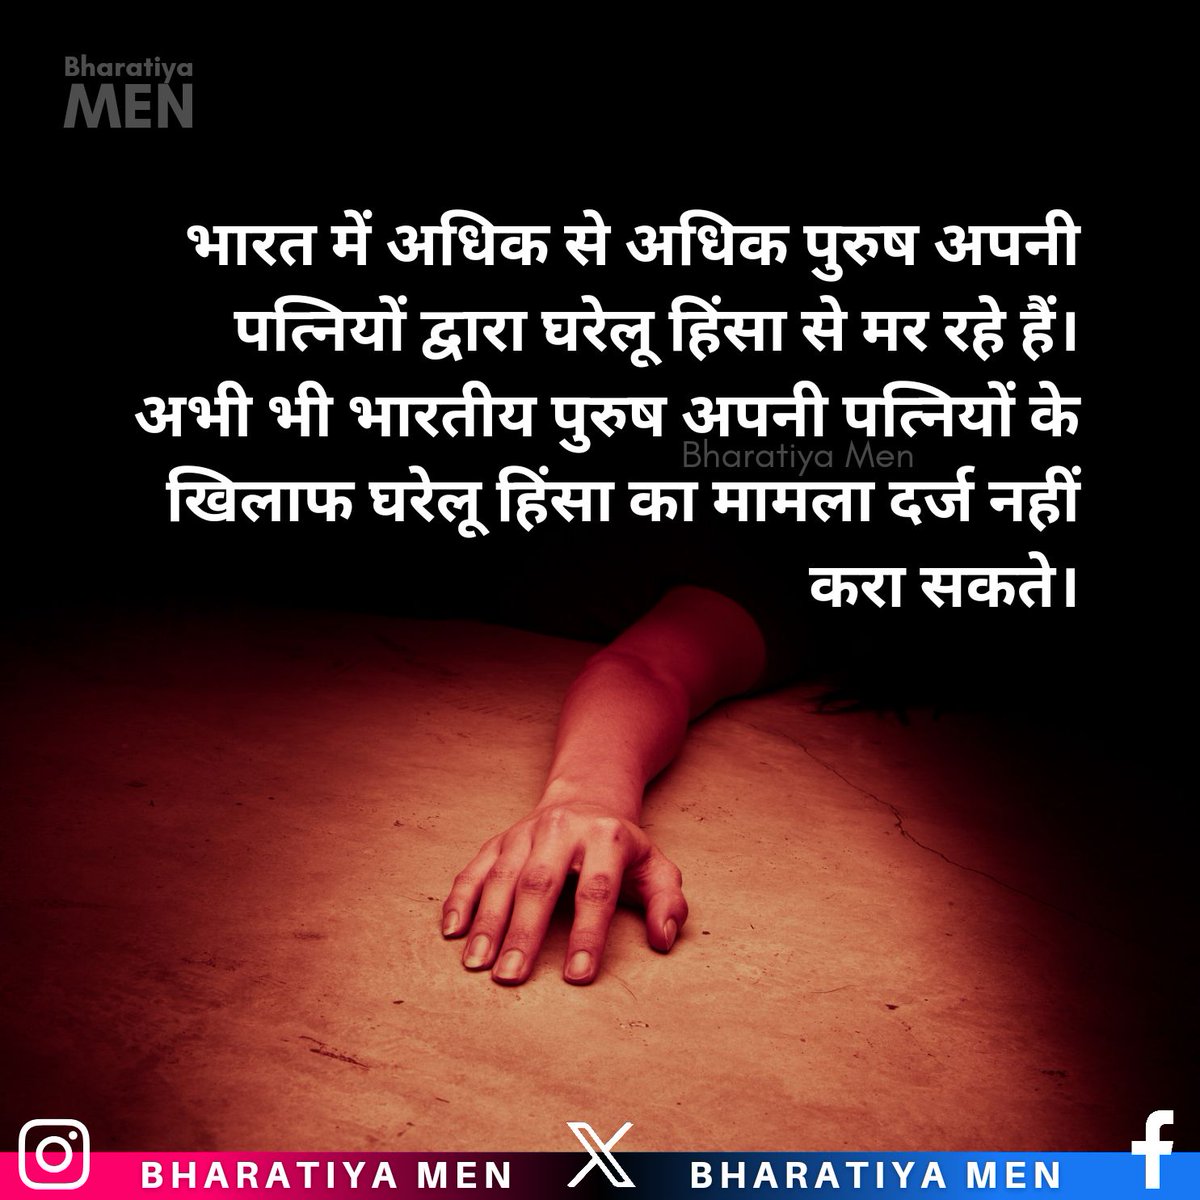 More and more men in India are dying from domestic violence by their wives. Indian men still cannot file cases of domestic violence against their wives.
#DomesticViolence #JudicialMisandry #Men #SaveMen #MensRightsAreHumanRights #Misandry